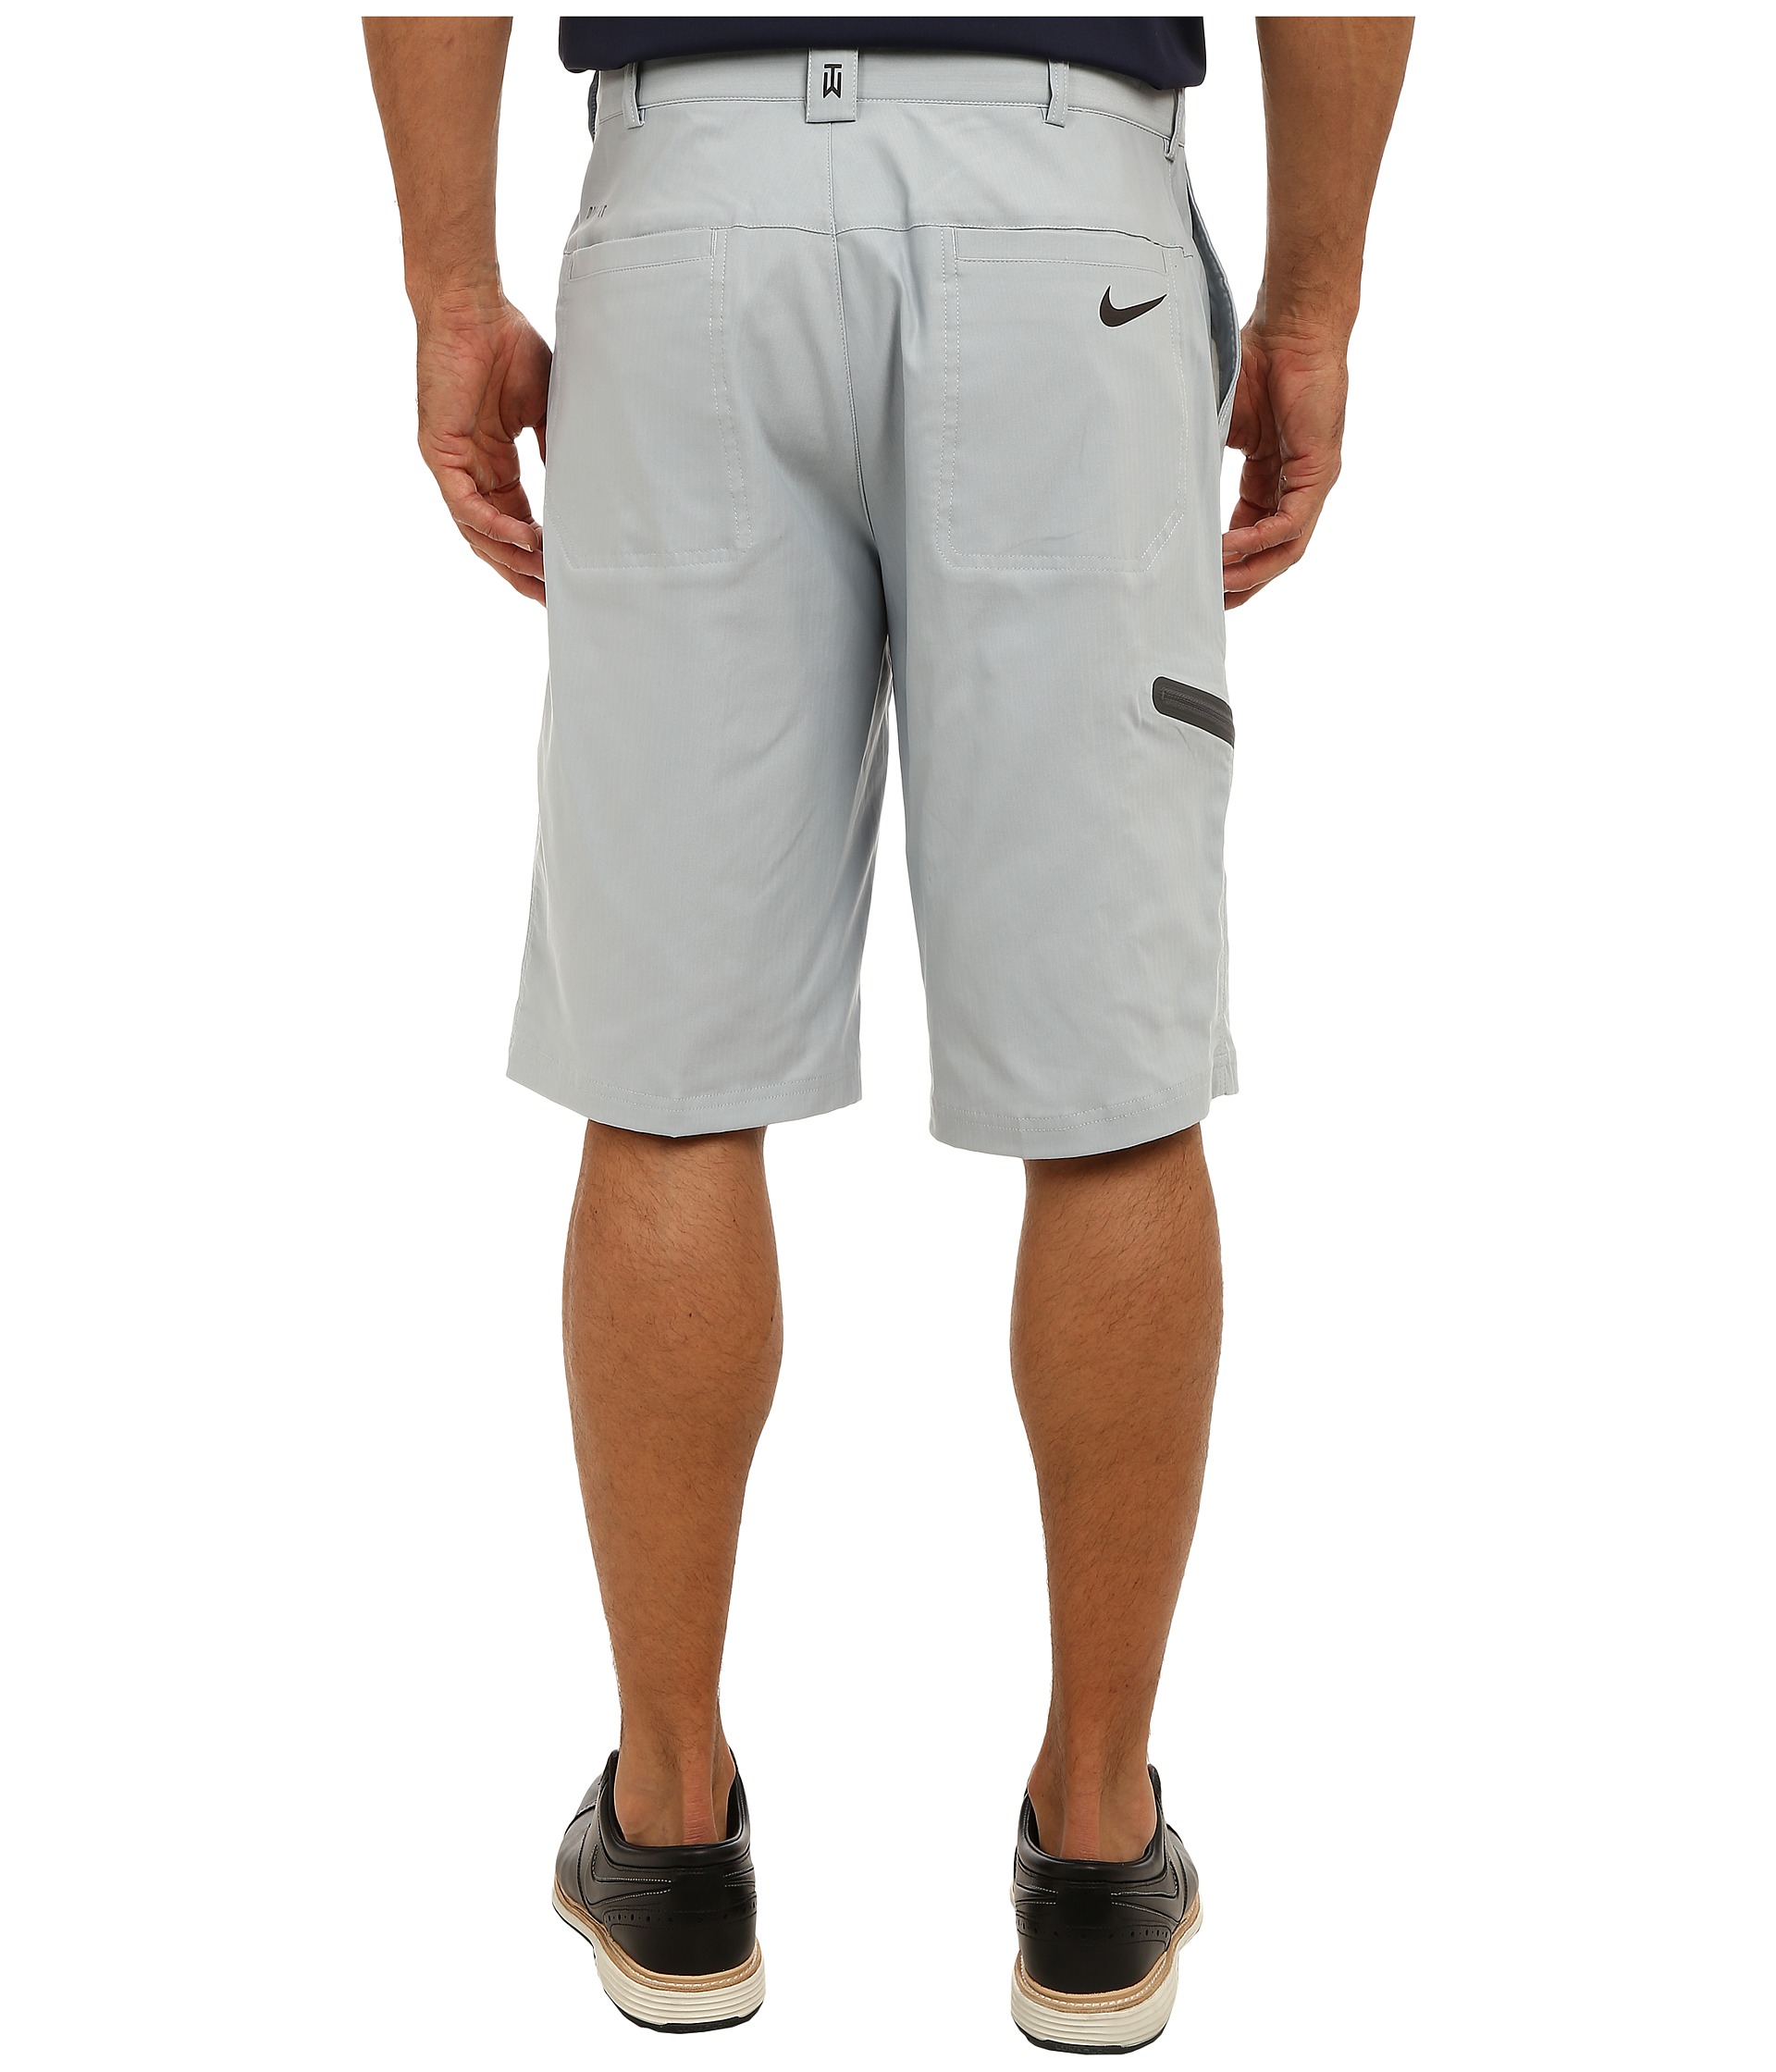 Nike Golf Tiger Woods Practice Short Black - Zappos.com Free Shipping